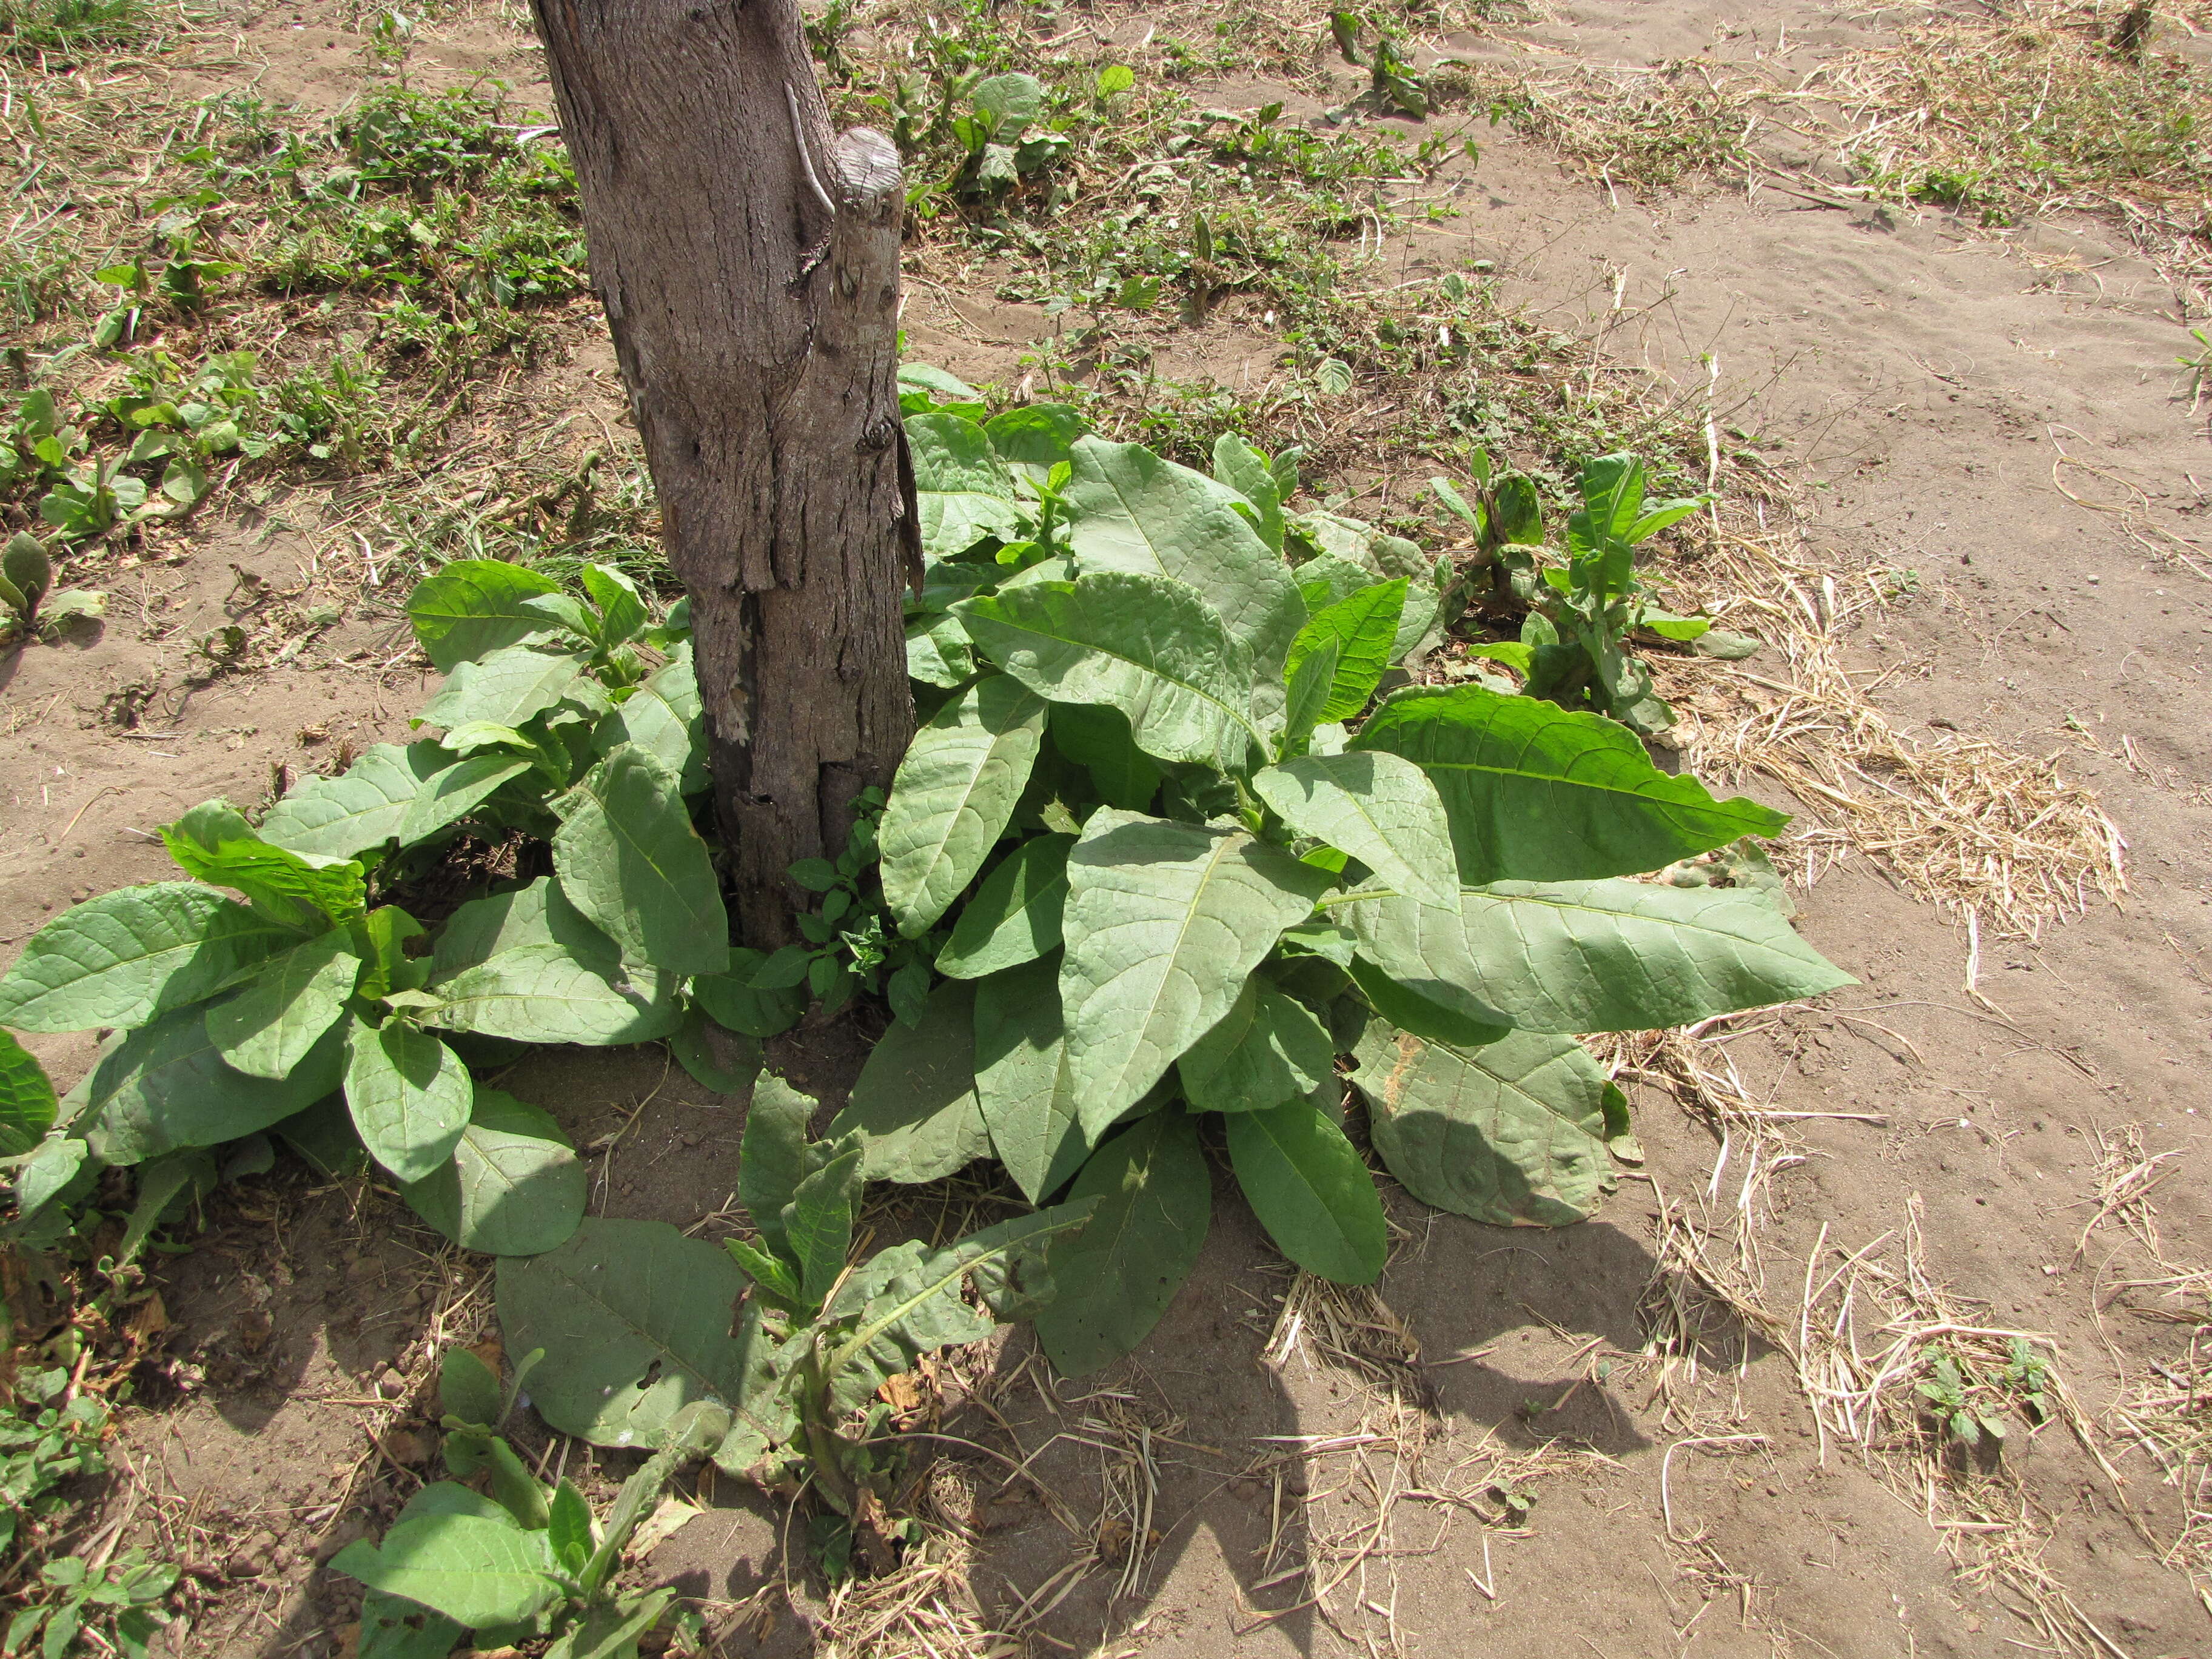 Image of cultivated tobacco